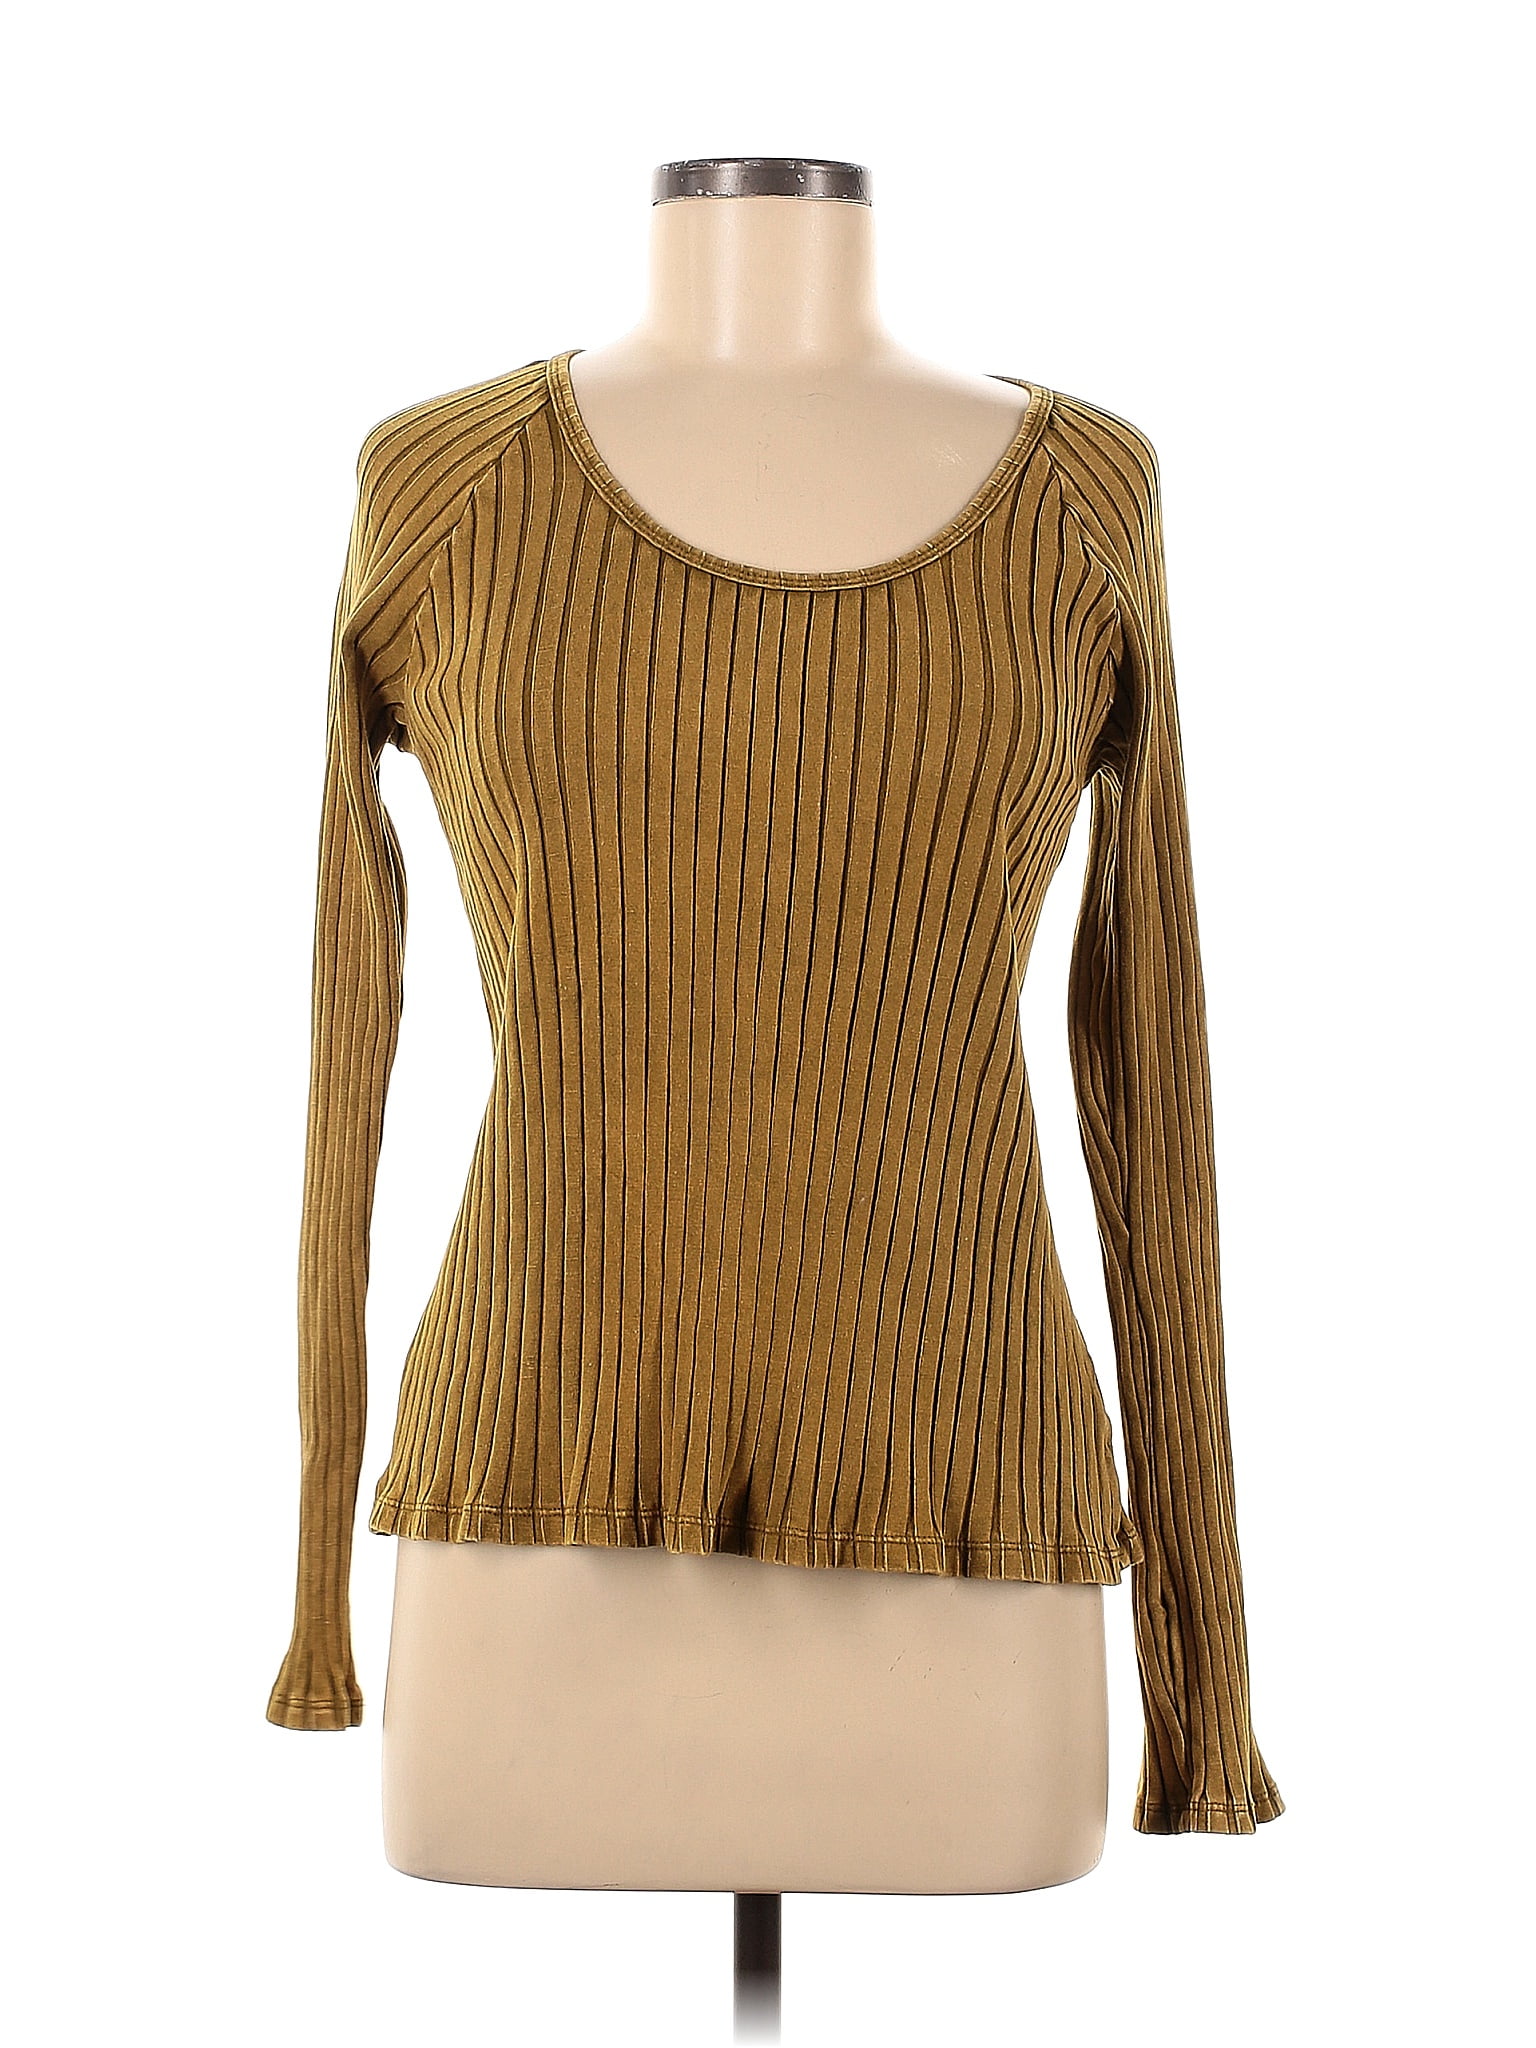 Knox Rose Color Block Stripes Gold Pullover Sweater Size M - 48% off ...